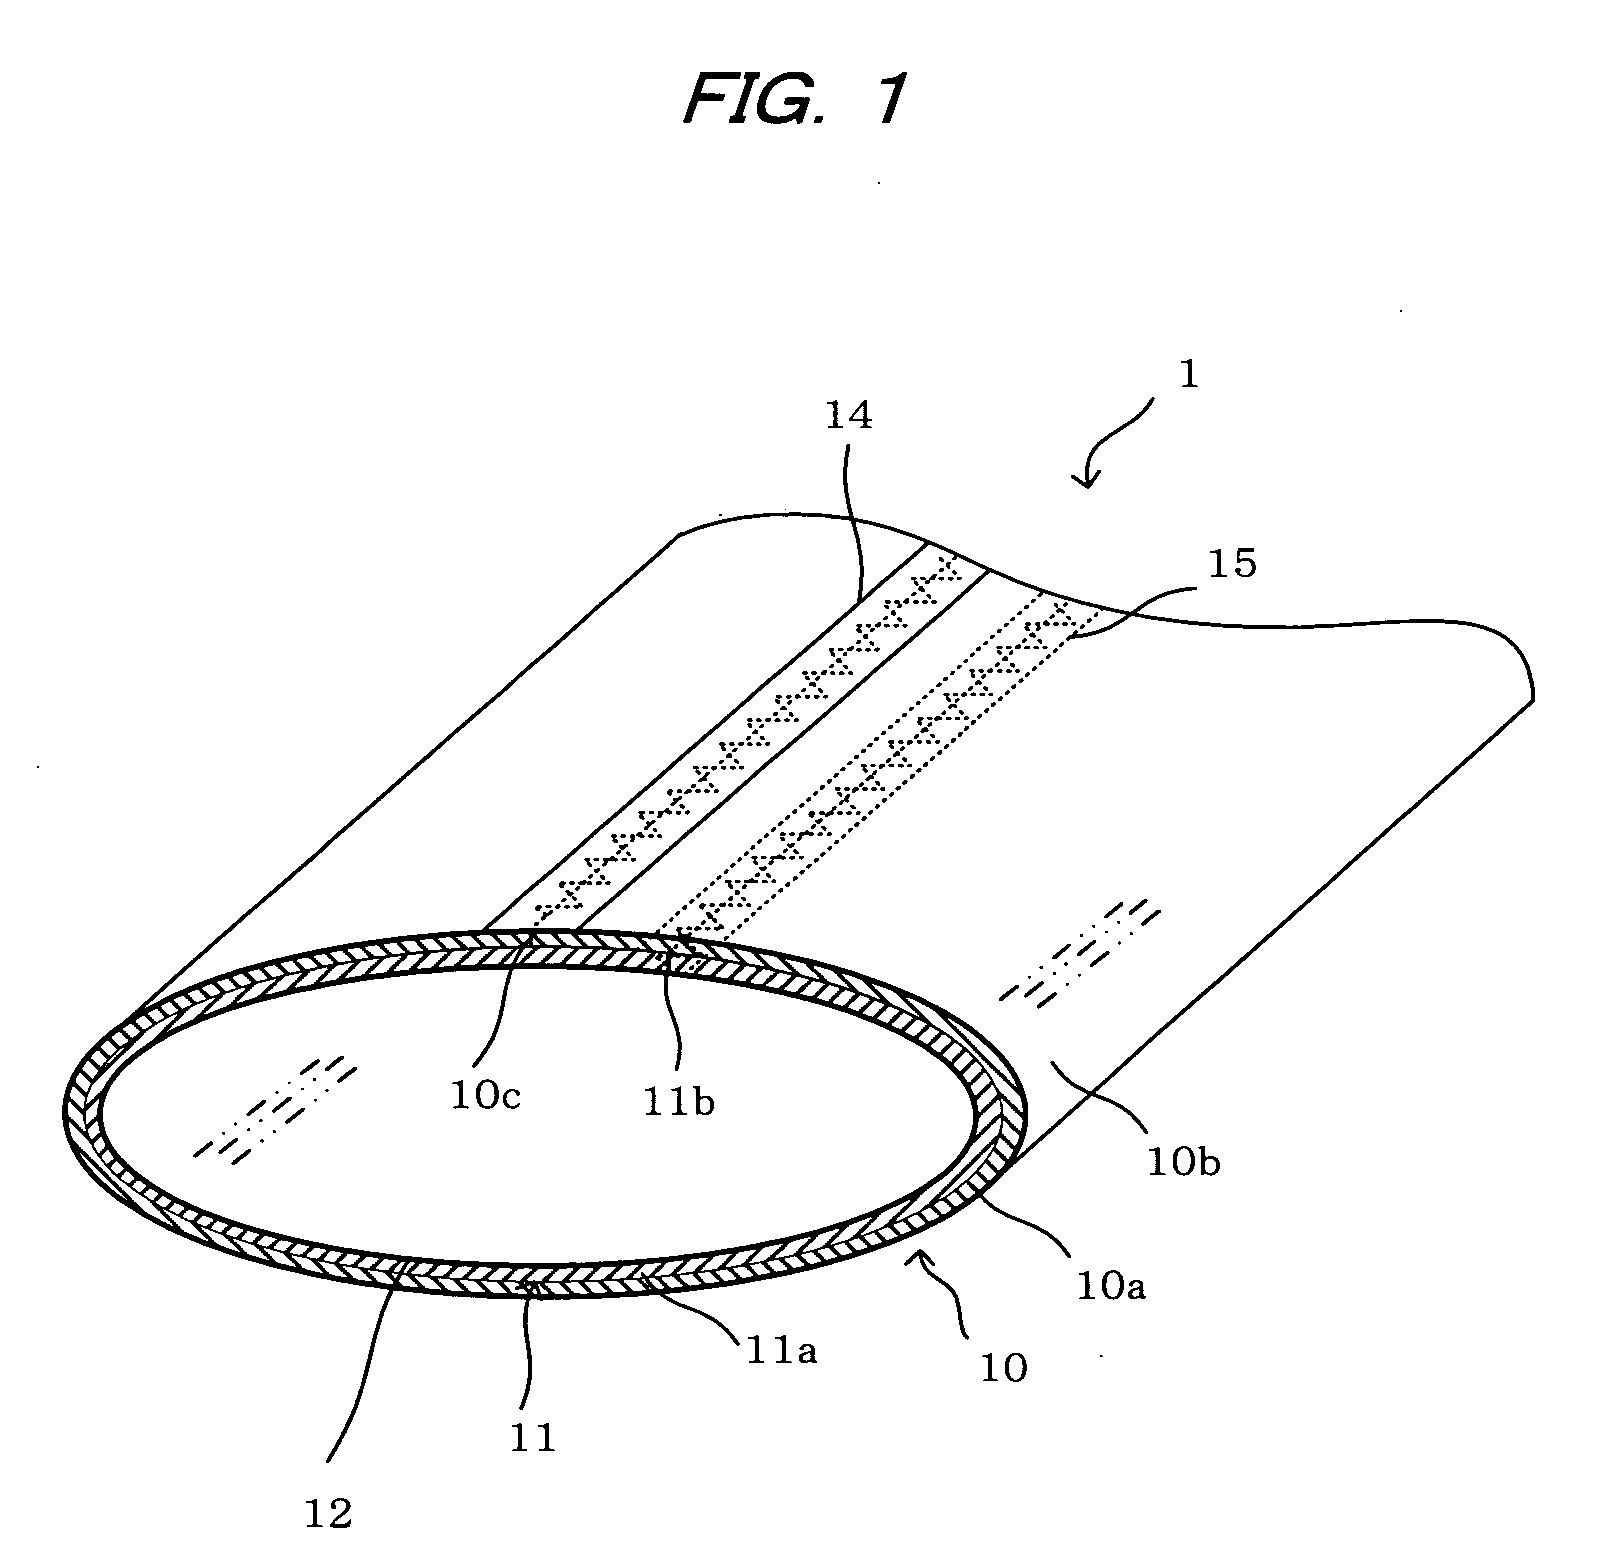 Pipe lining material and method for manufacturing same